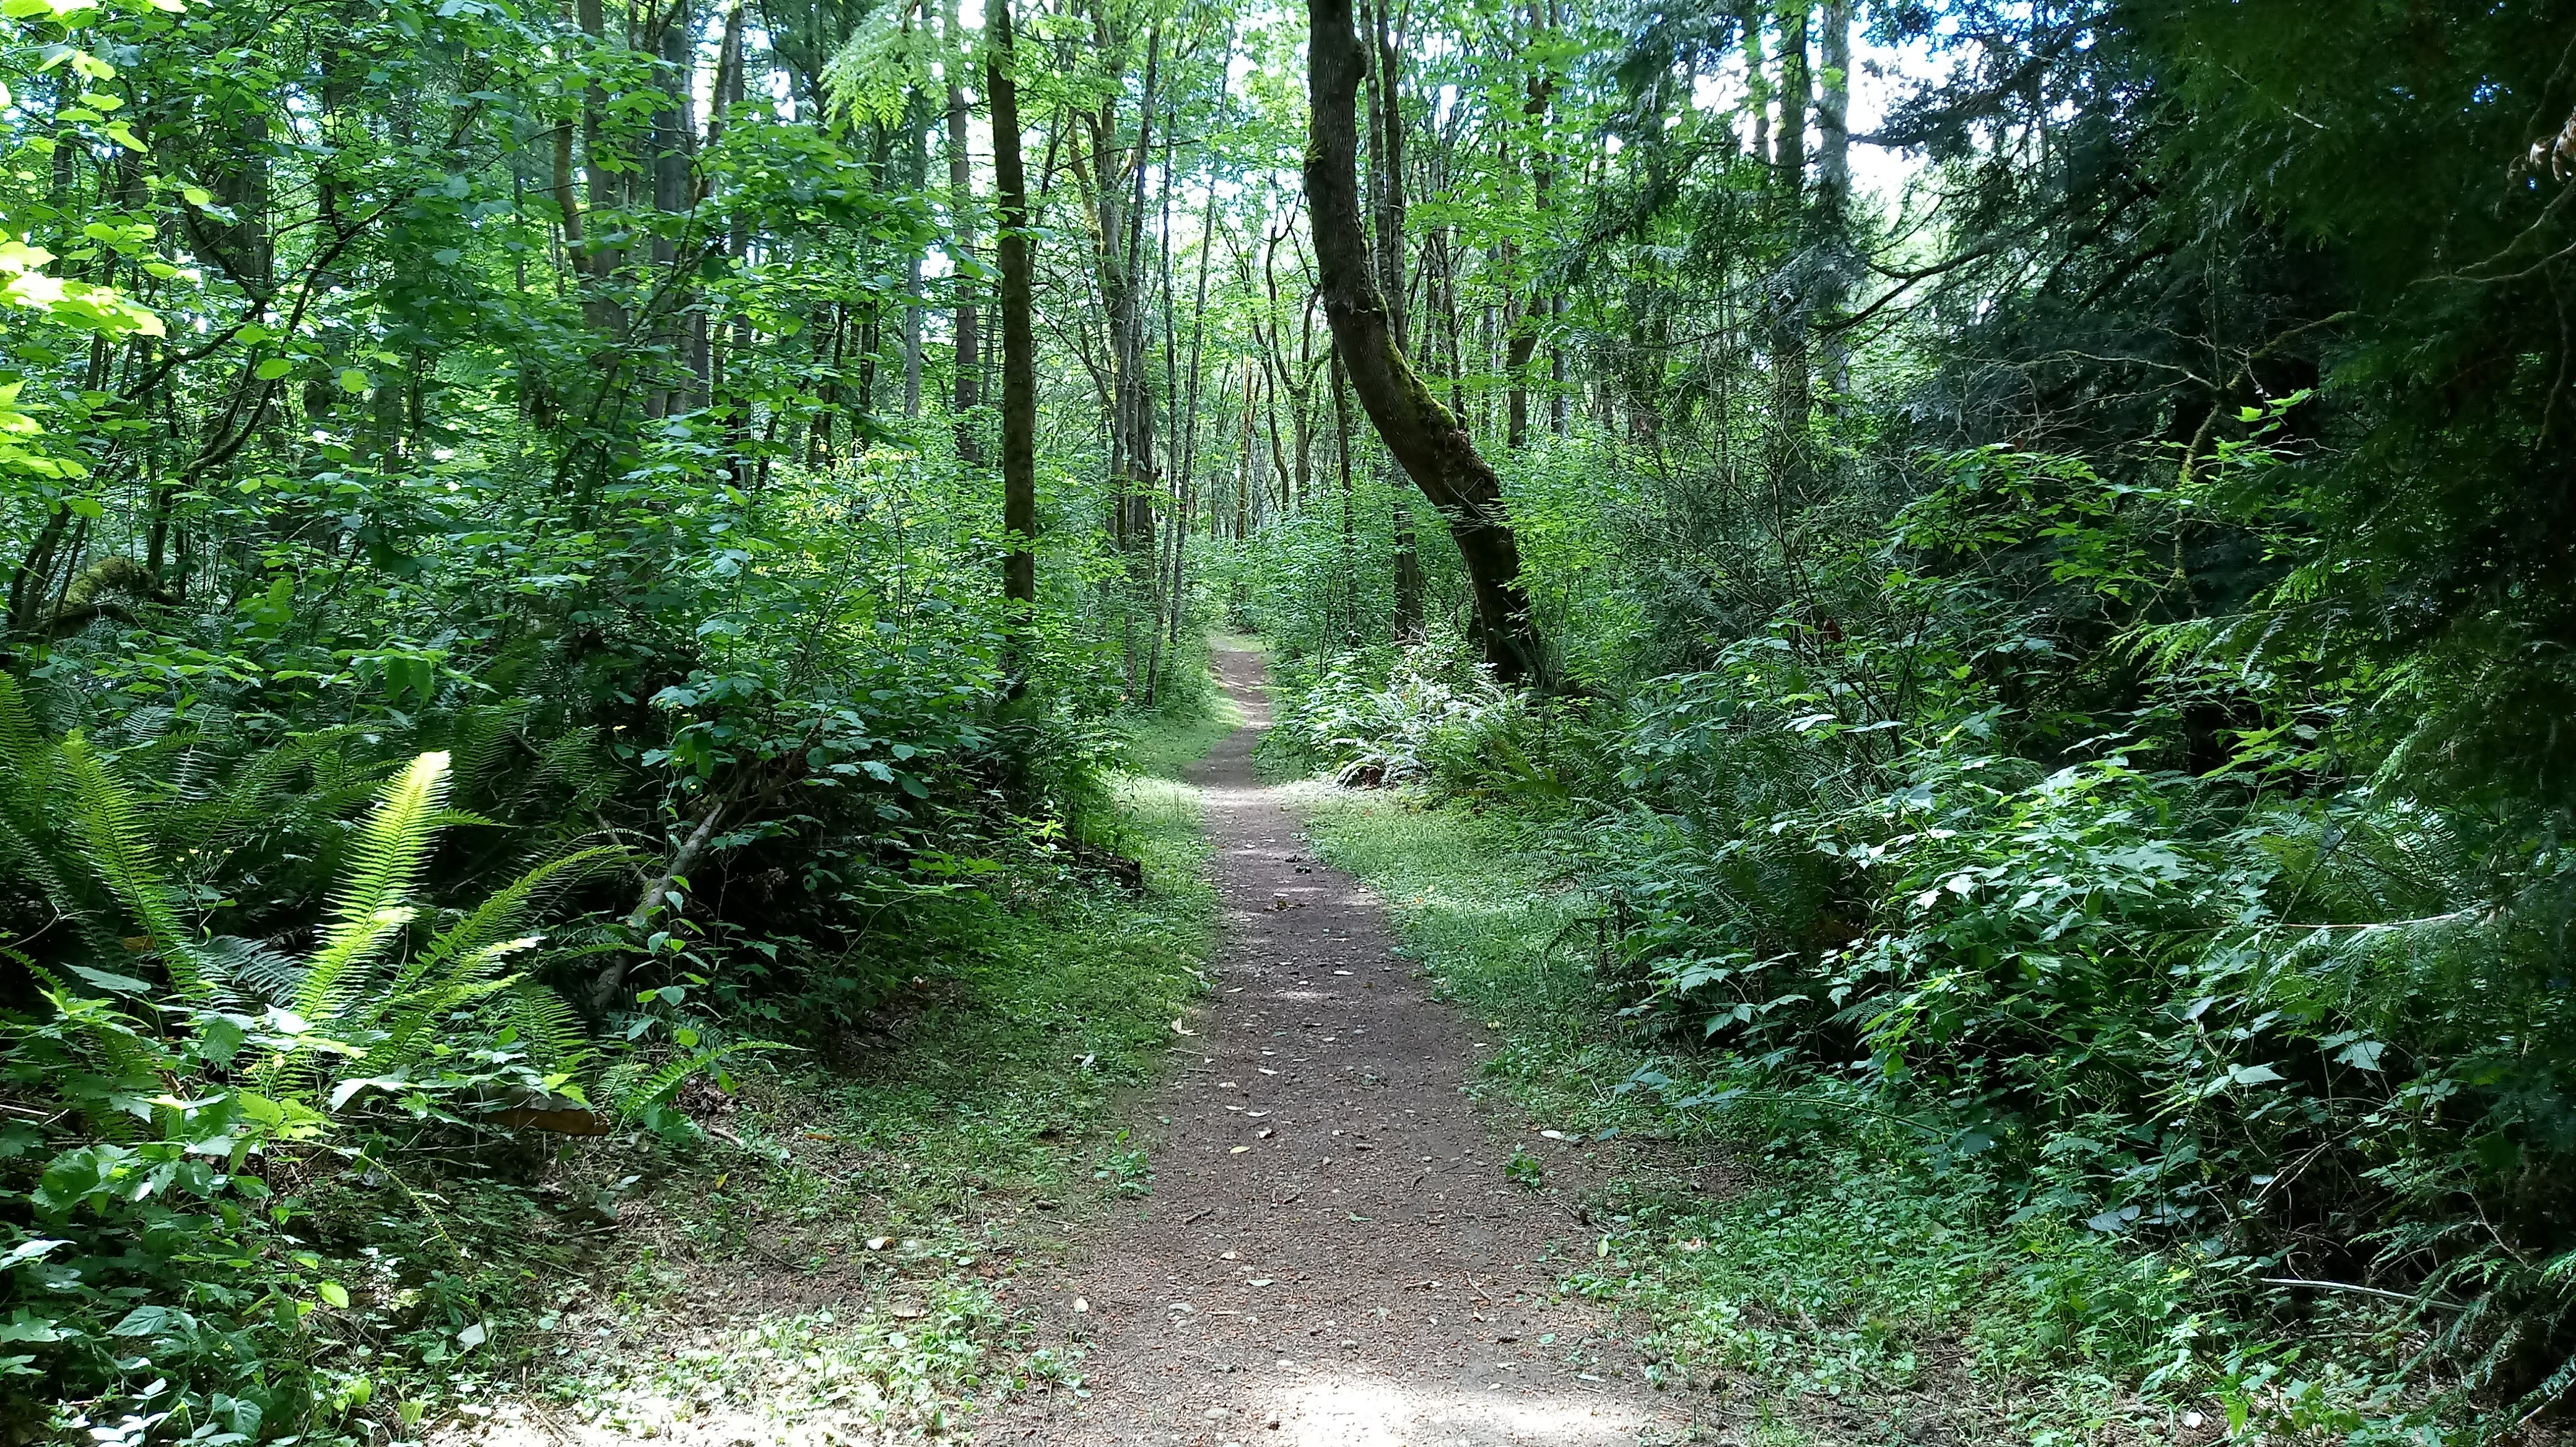 ../images/trails/highlands//02 Trail in the woods between 140th Ave SE and SE 87th Pl.jpg